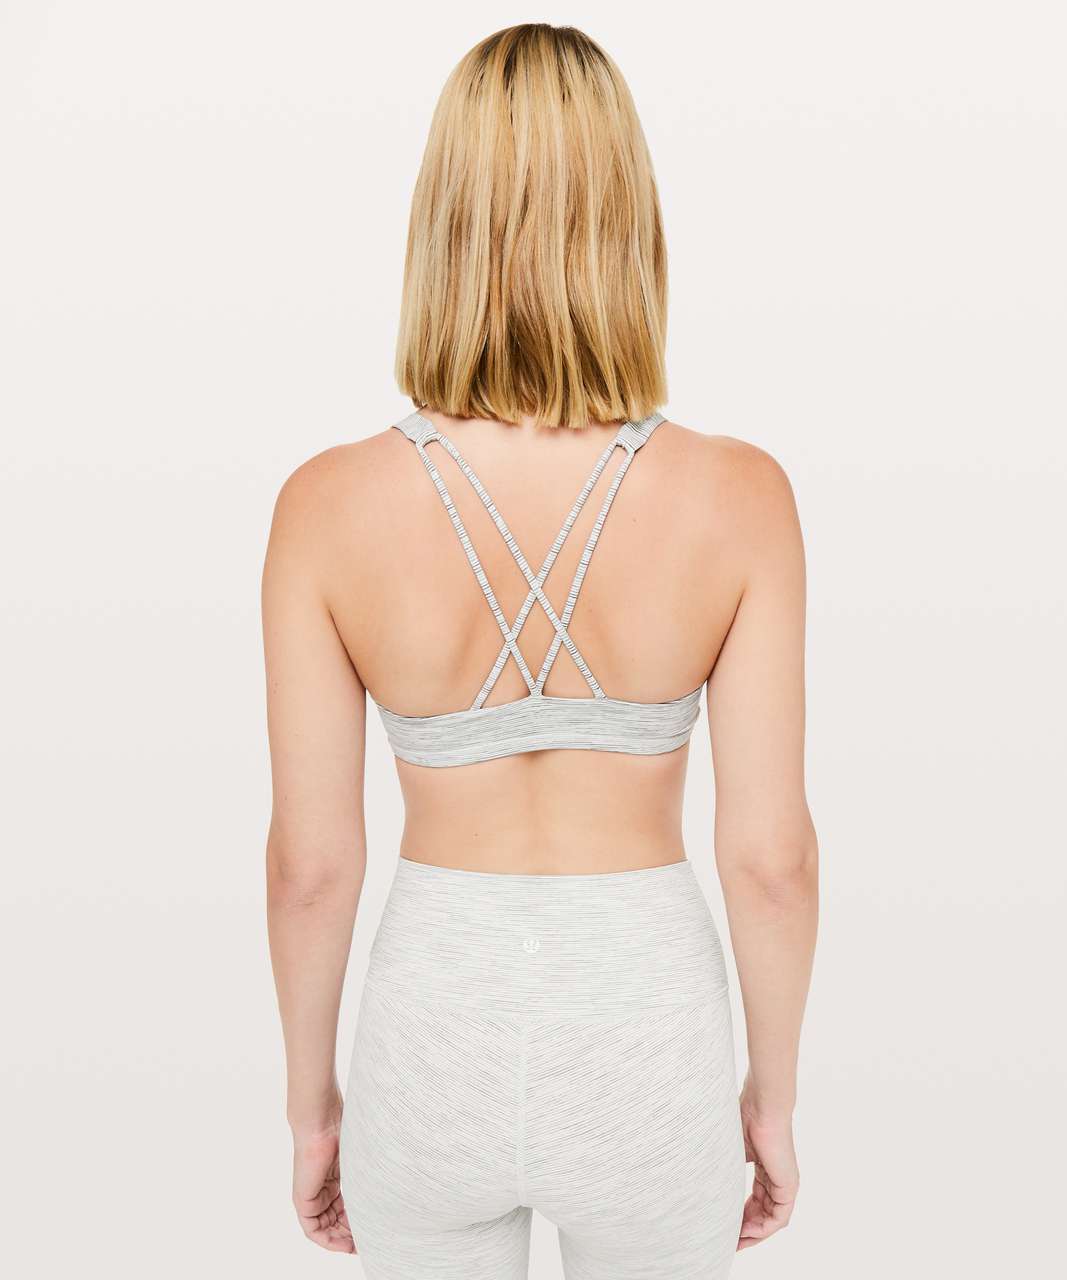 Lululemon Free To Be Bra - Wee Are From Space Ice Grey Alpine White